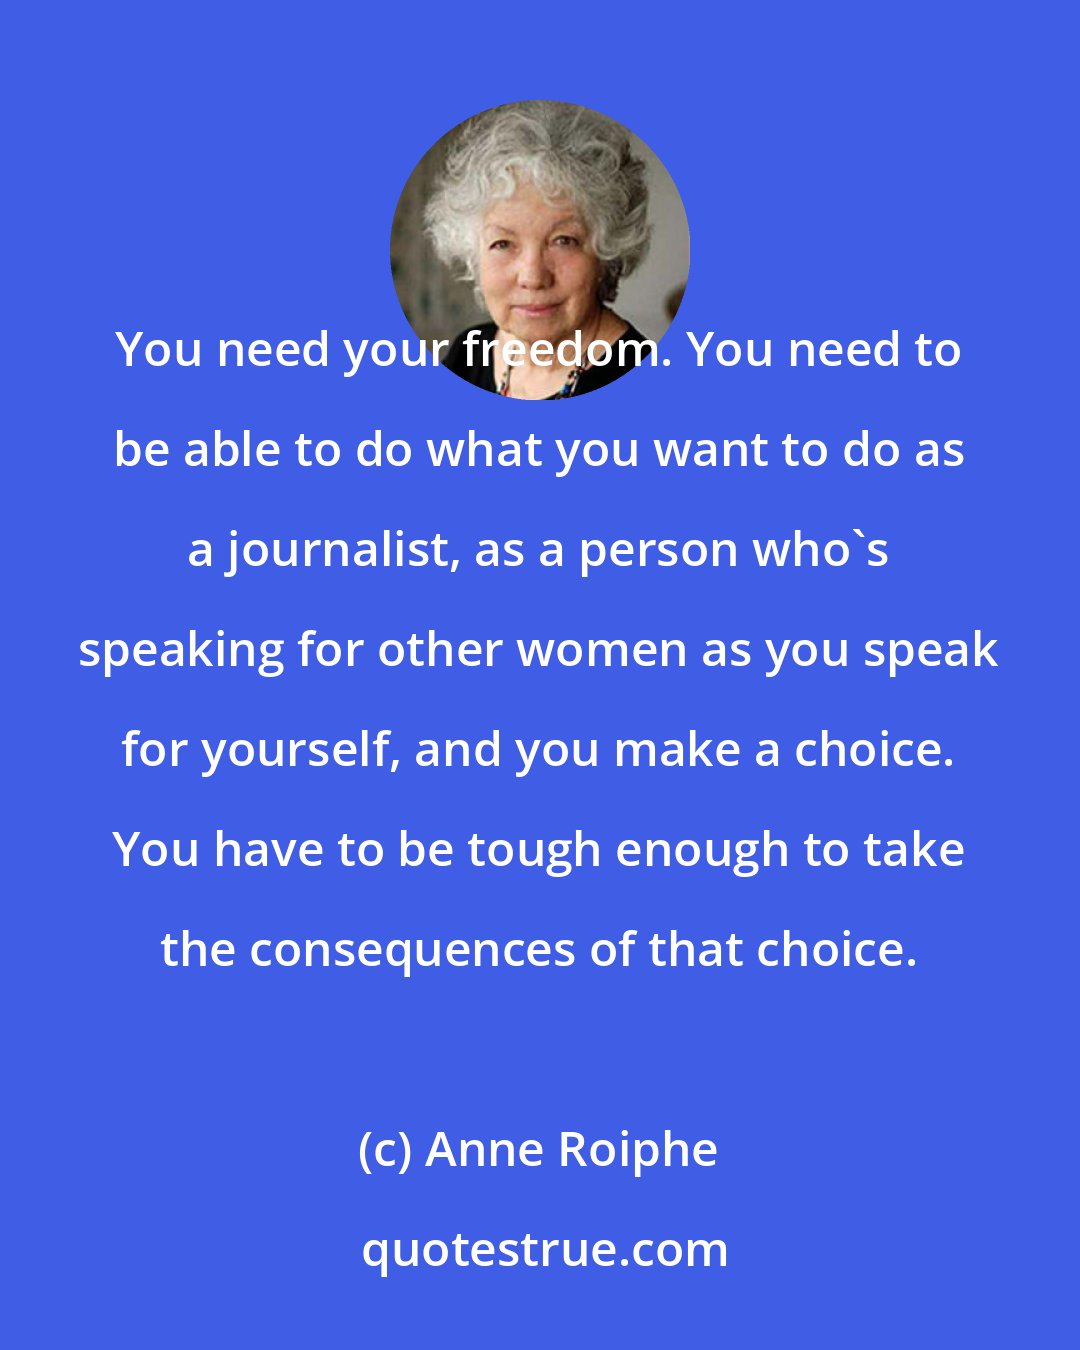 Anne Roiphe: You need your freedom. You need to be able to do what you want to do as a journalist, as a person who's speaking for other women as you speak for yourself, and you make a choice. You have to be tough enough to take the consequences of that choice.